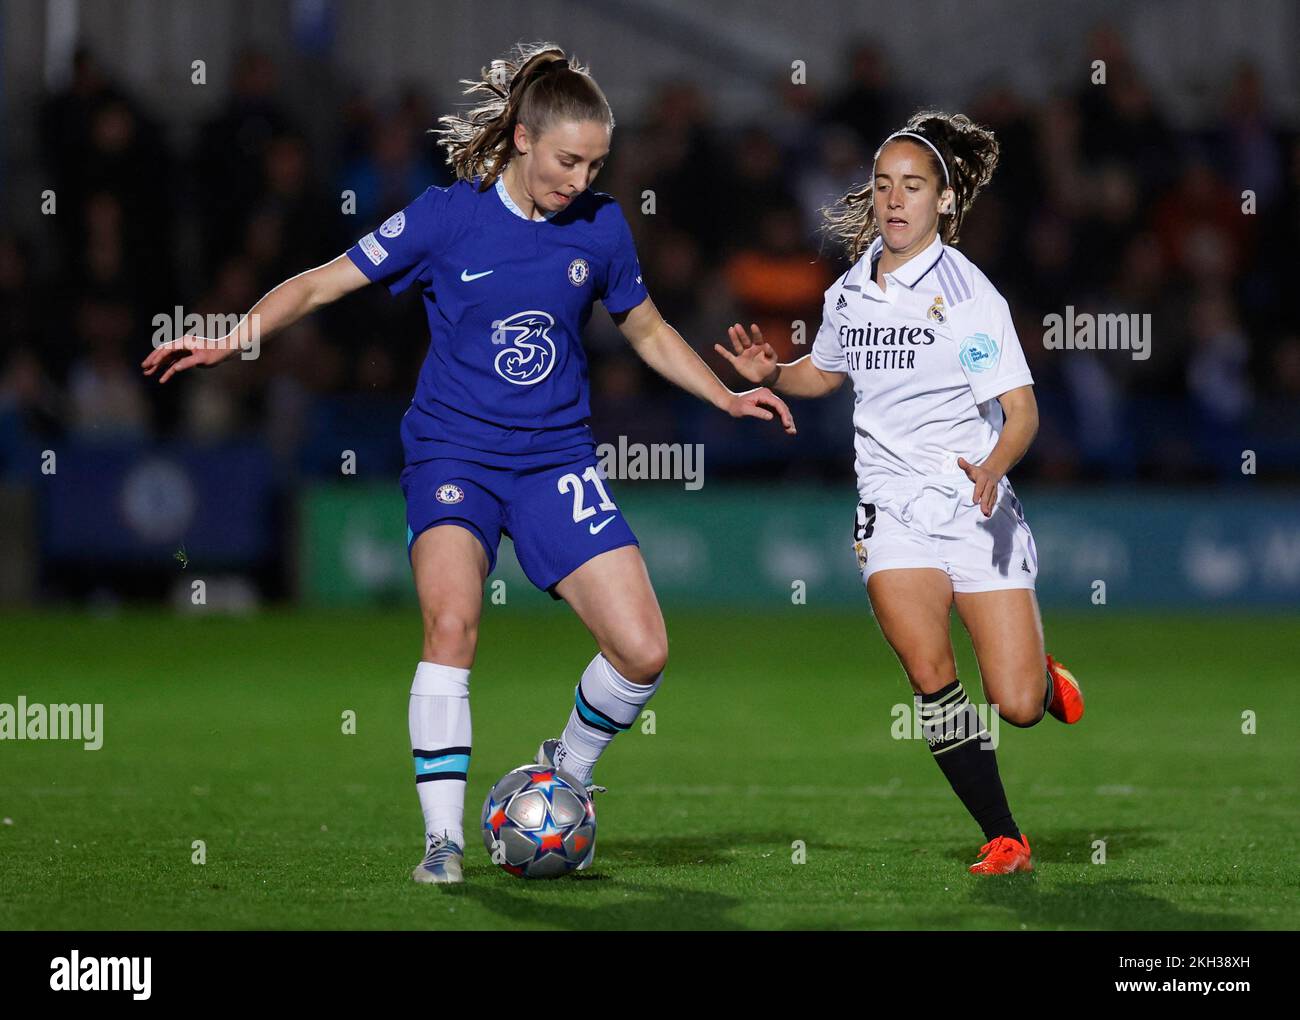 Soccer Football - Women's Champions League - Group A - Chelsea v Real Madrid - Kingsmeadow, London, Britain - November 23, 2022 Chelsea's Niamh Charles in action with Real Madrid's Maite Oroz REUTERS/Andrew Couldridge Stock Photo